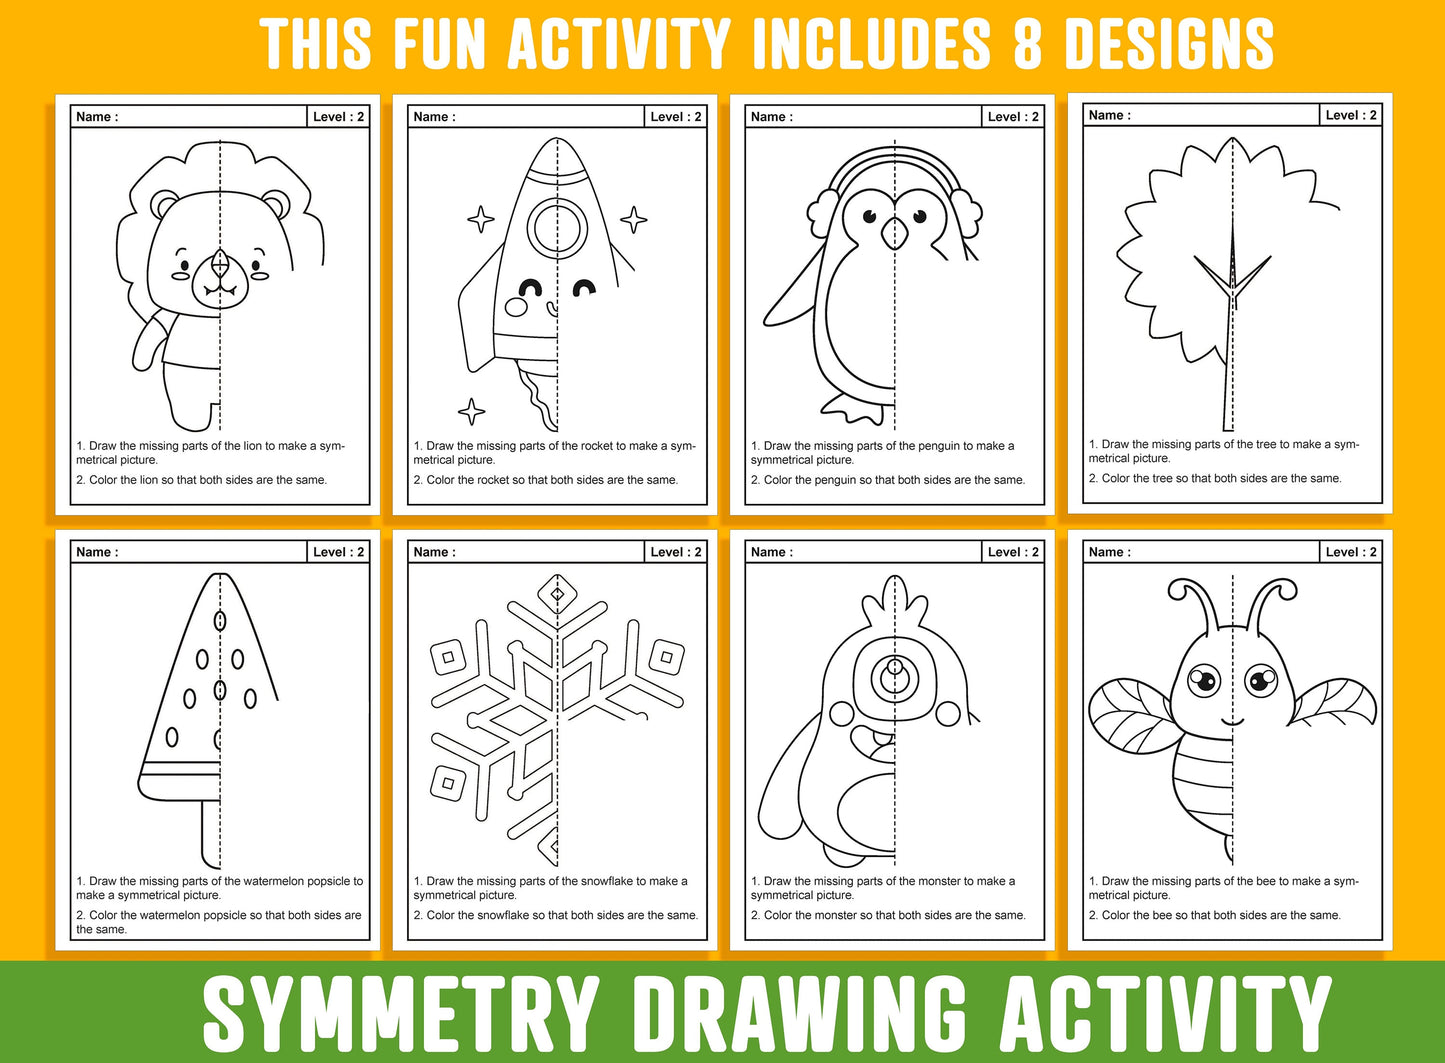 Symmetry Drawing, Lines of Symmetry Activity, 24 Pages/8 Designs, Each With 3 Levels of Difficulty, Math Art, Symmetry Drawing & Coloring